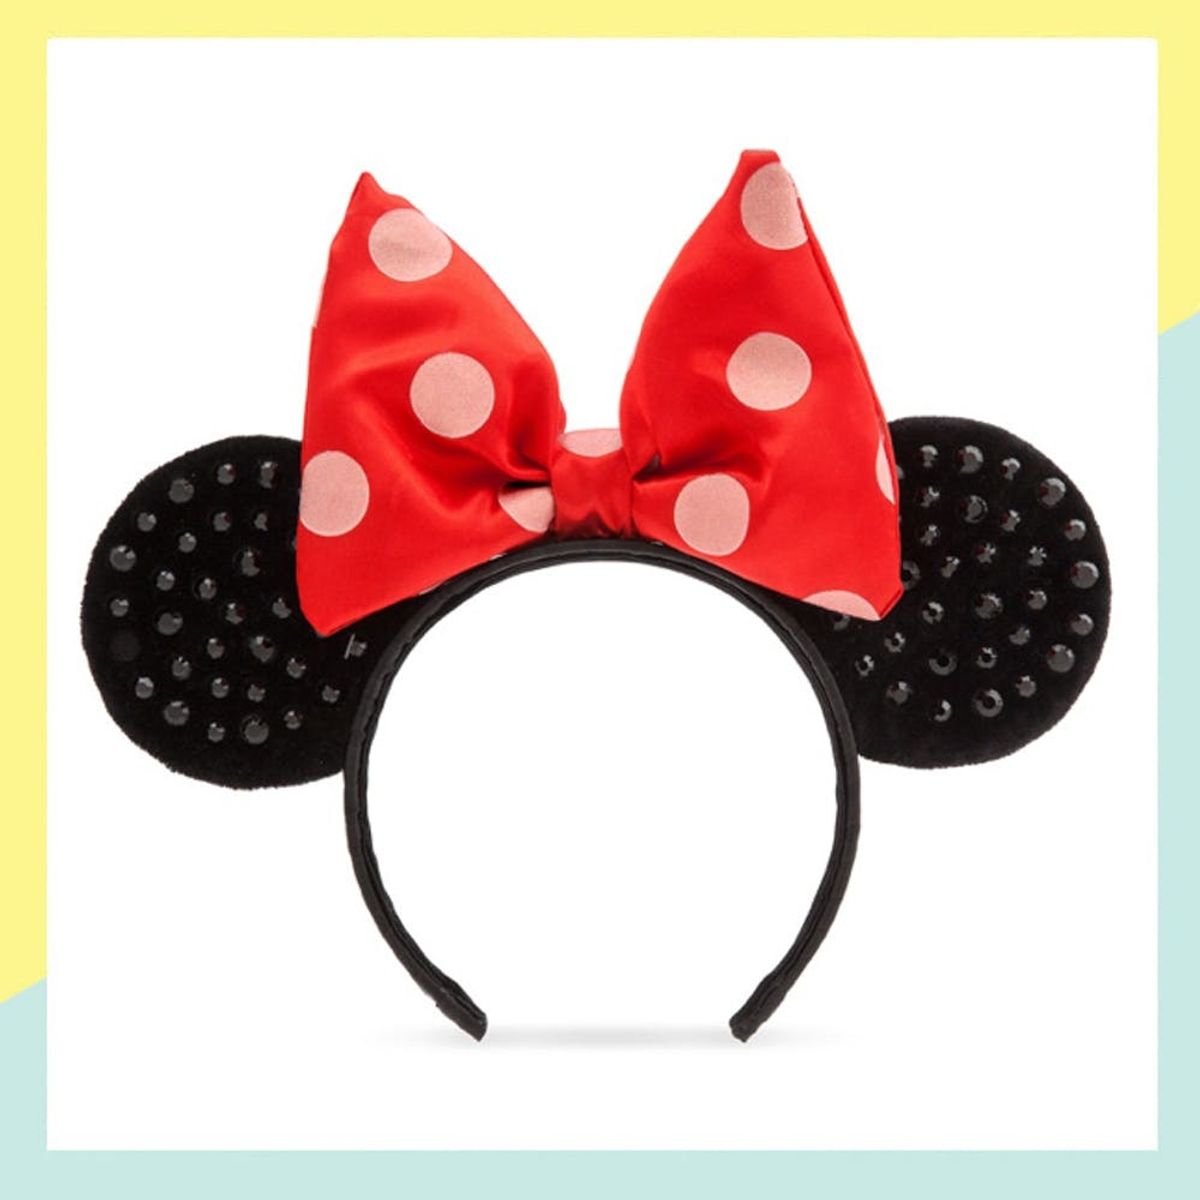 Every Polka Dot Piece You Need from Disney and Torrid’s New Minnie Mouse Lines